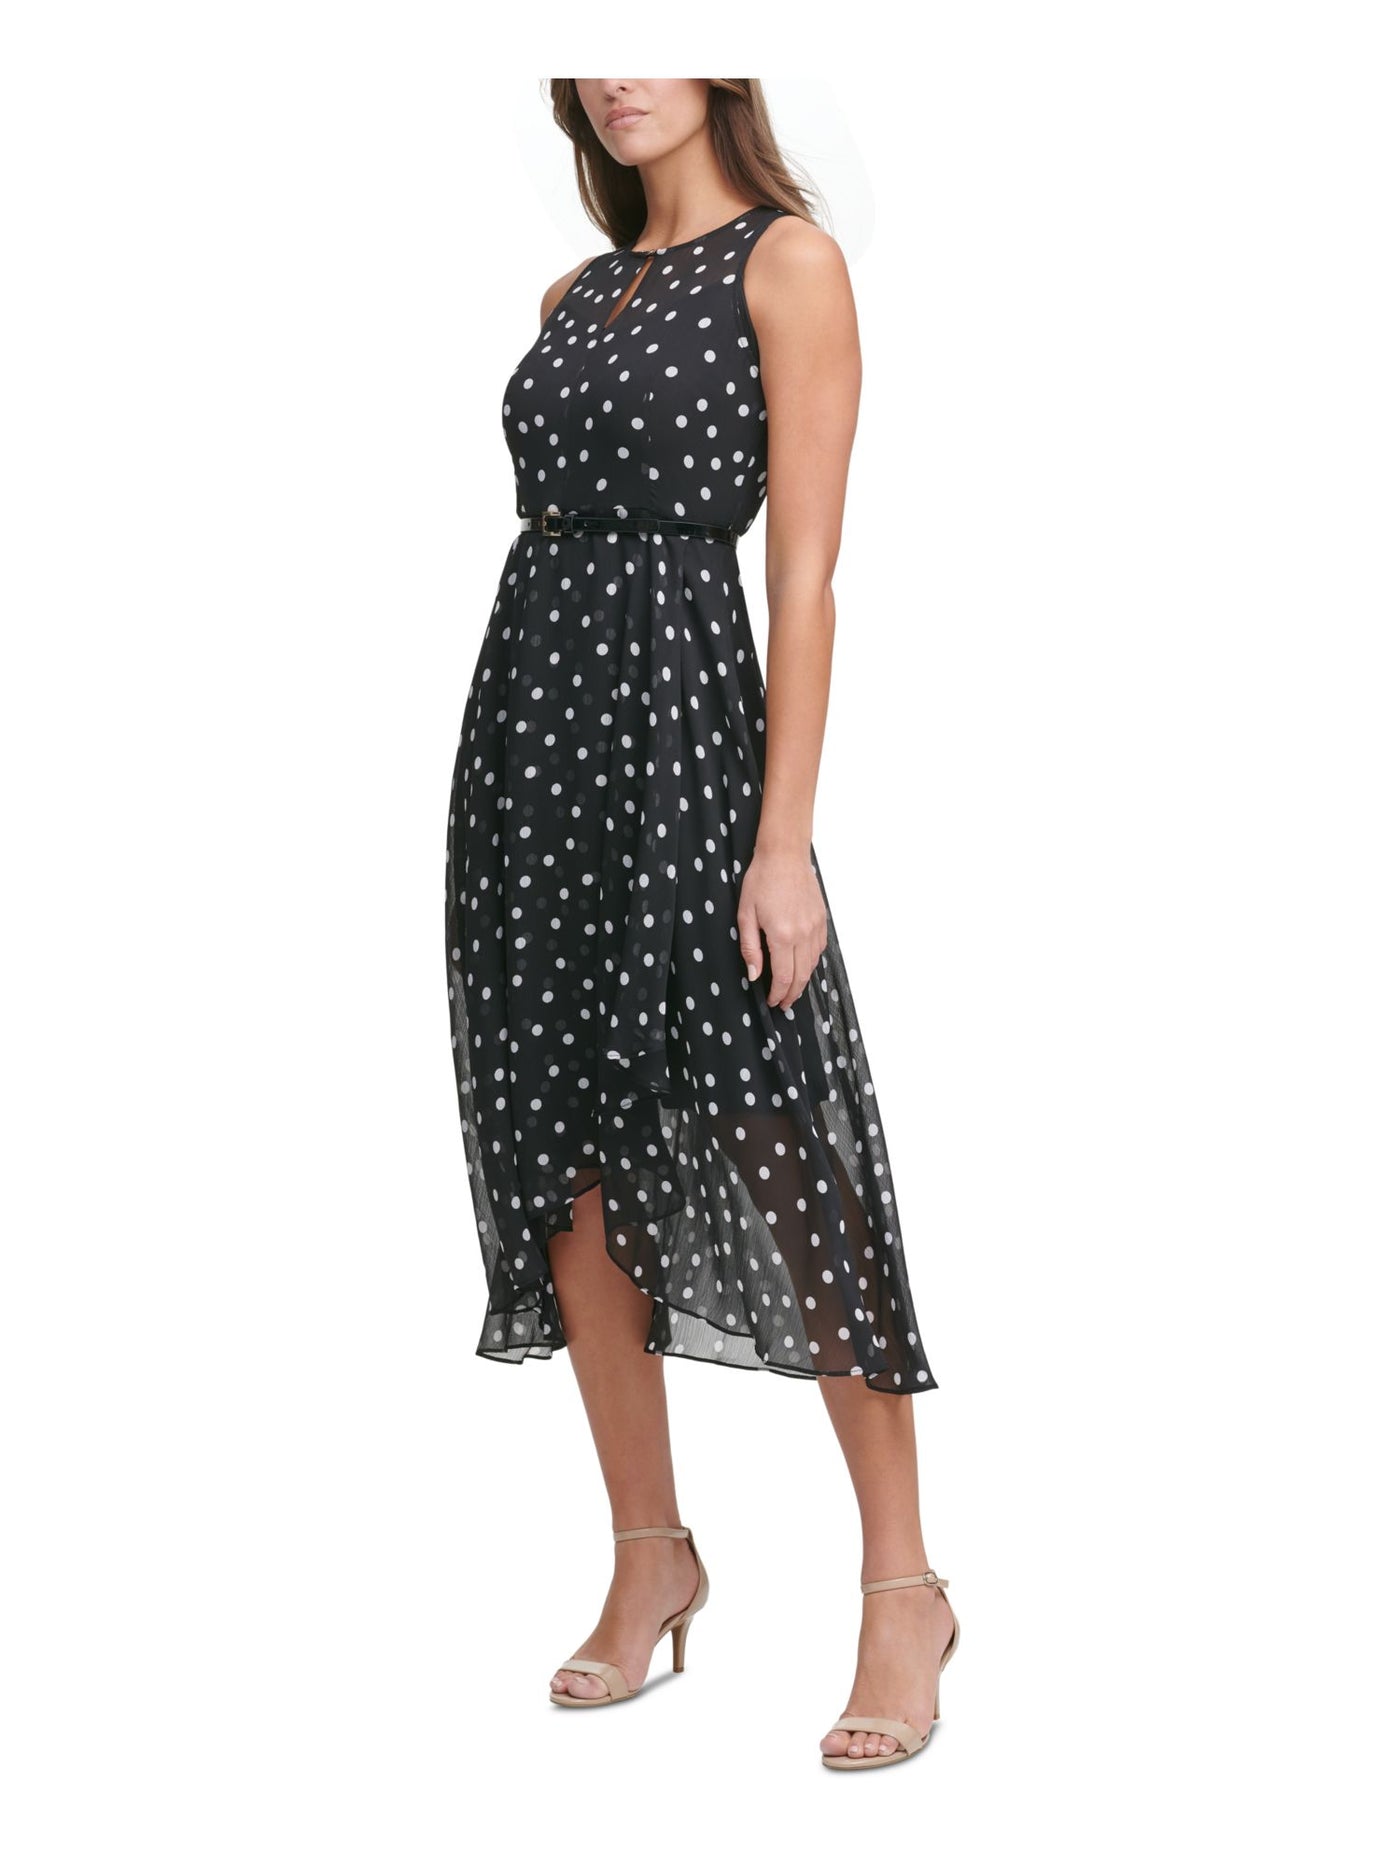 TOMMY HILFIGER Womens Black Zippered Cut Out Crossover Hi-lo Hem Sheer Lined Polka Dot Sleeveless Round Neck Midi Party Fit + Flare Dress 8